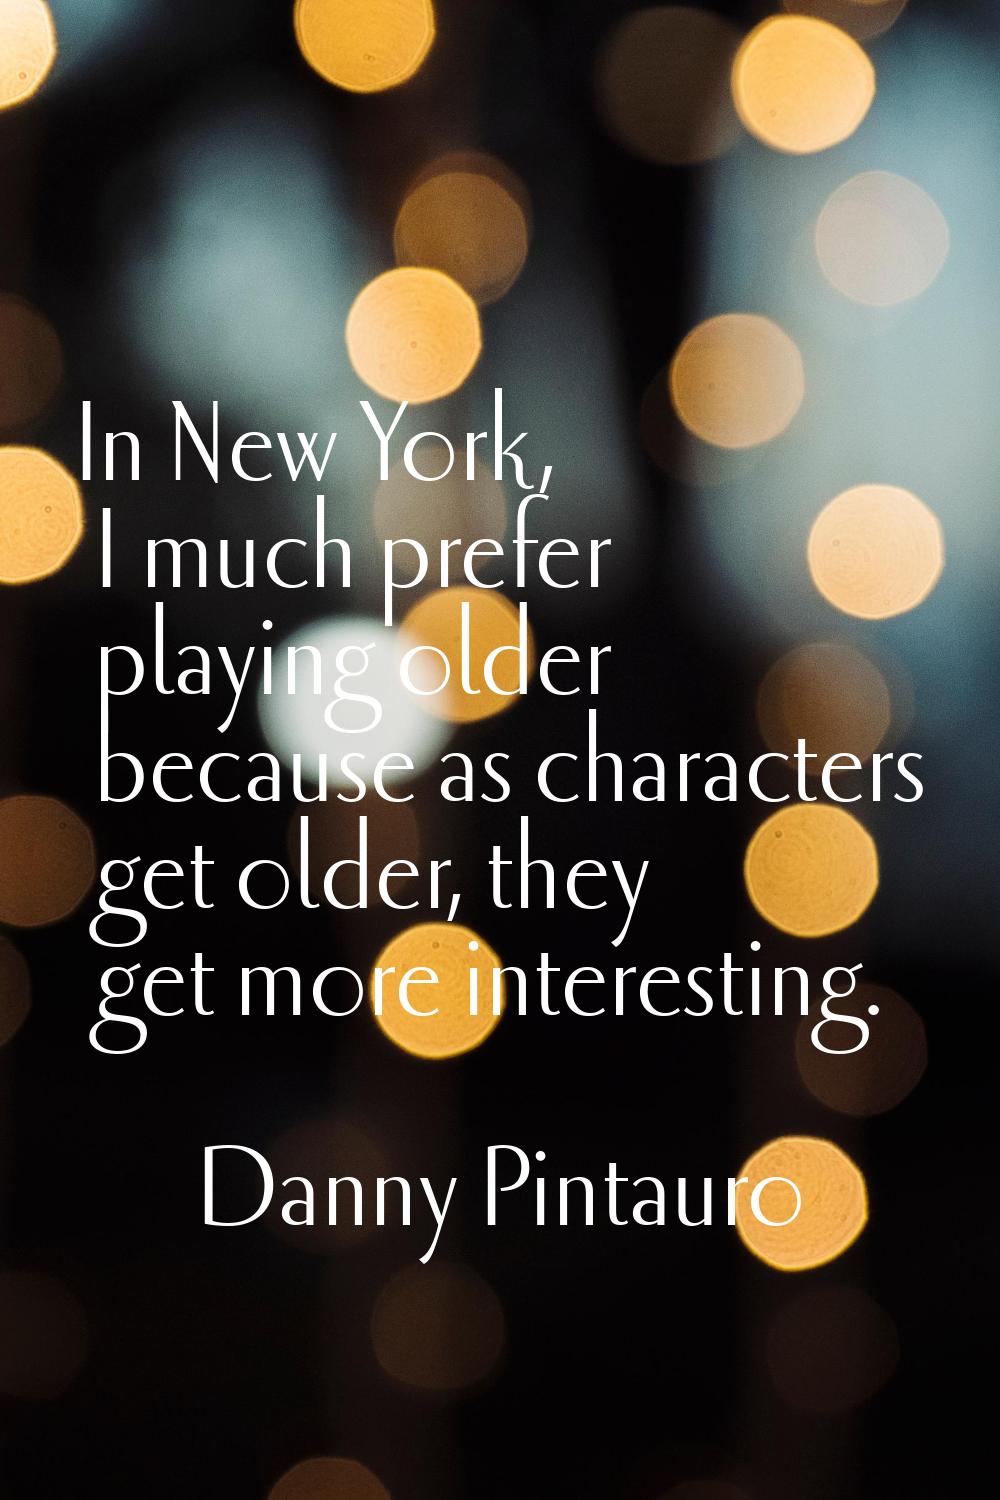 In New York, I much prefer playing older because as characters get older, they get more interesting